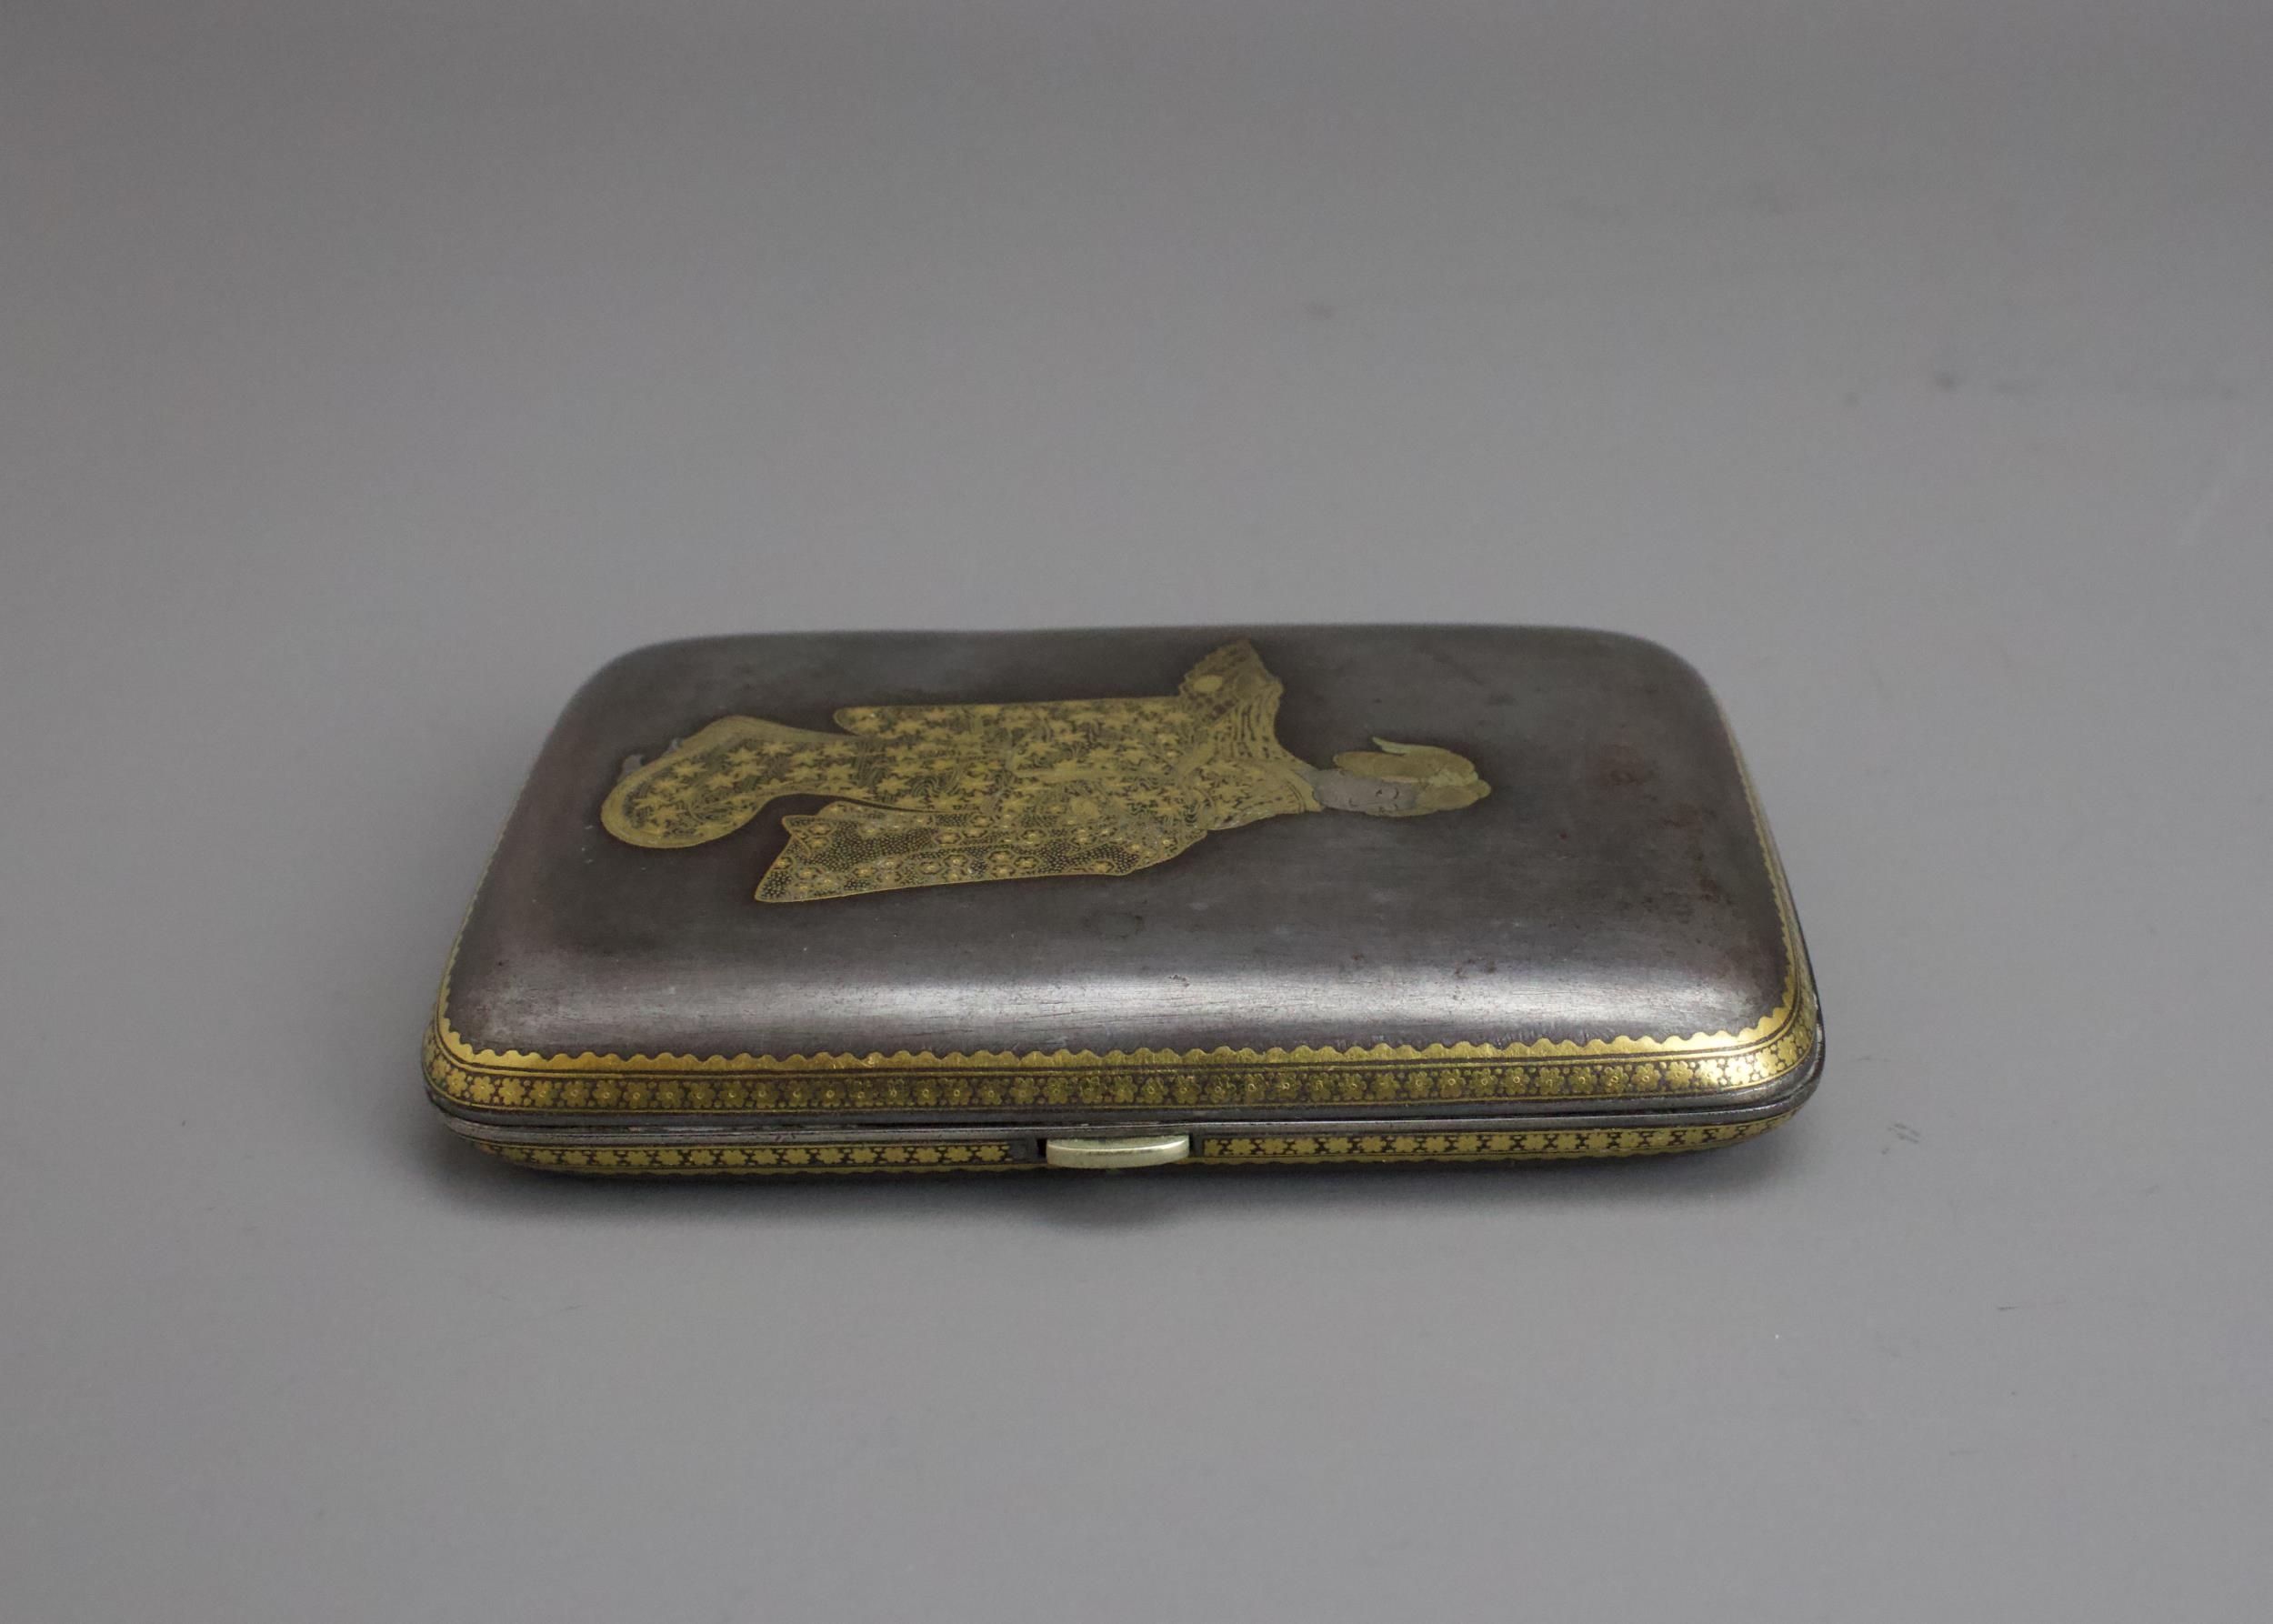 A Japanese Komai cigarette case, Meiji period - - W7cm L9cm H1.5cm - - inlaid in gilding and some - Image 3 of 4